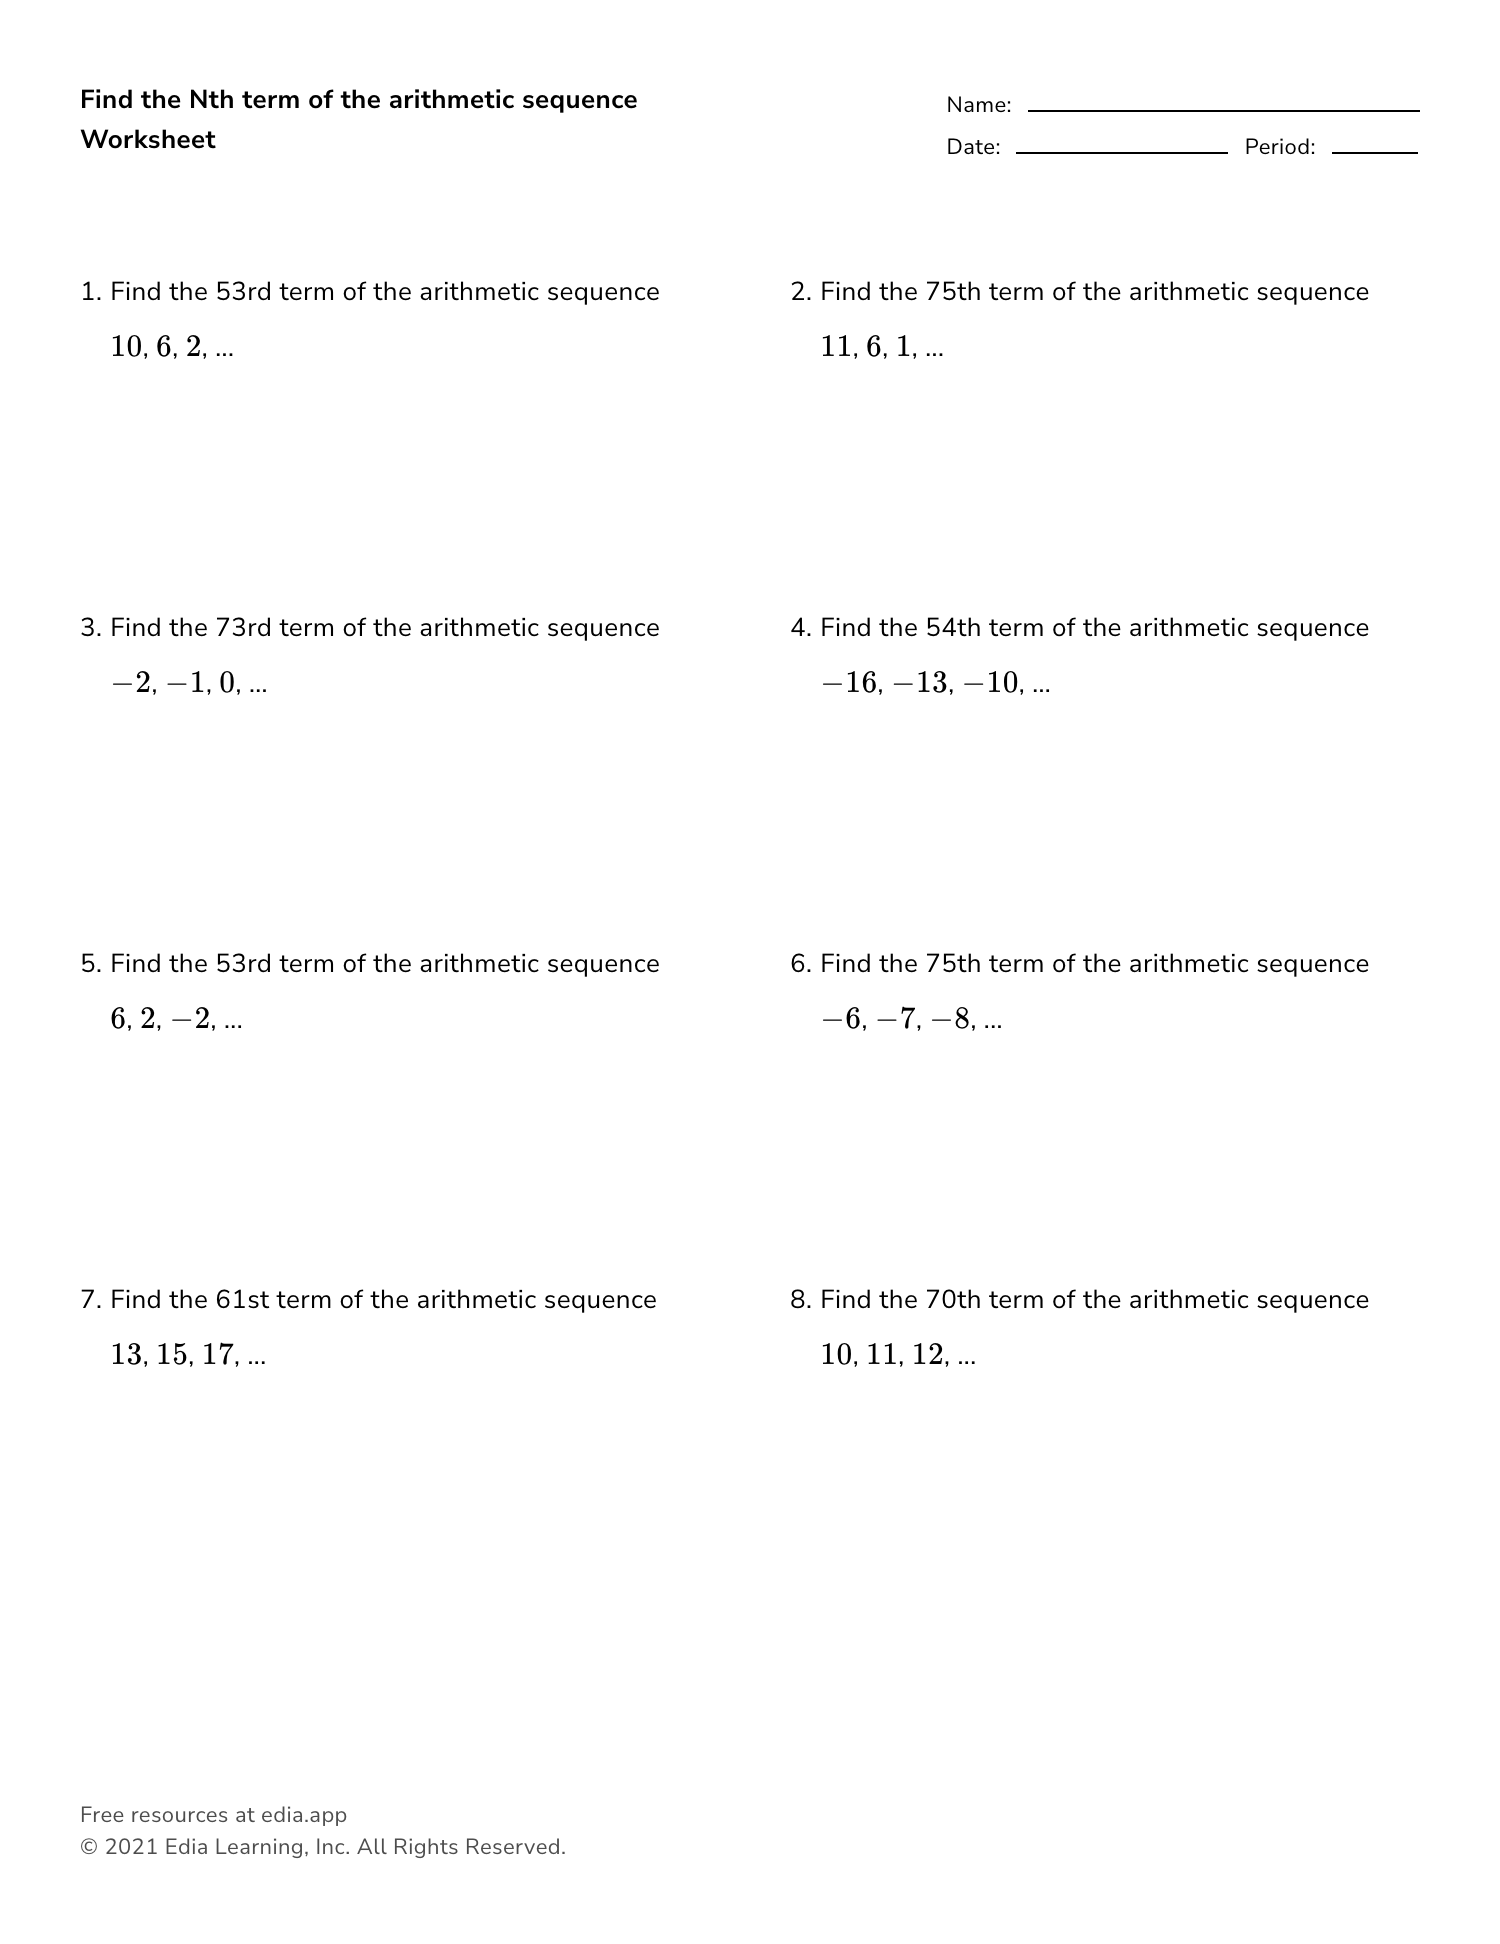 Find The Nth Term Of The Arithmetic Sequence - Worksheet In Arithmetic Sequence Worksheet Algebra 1